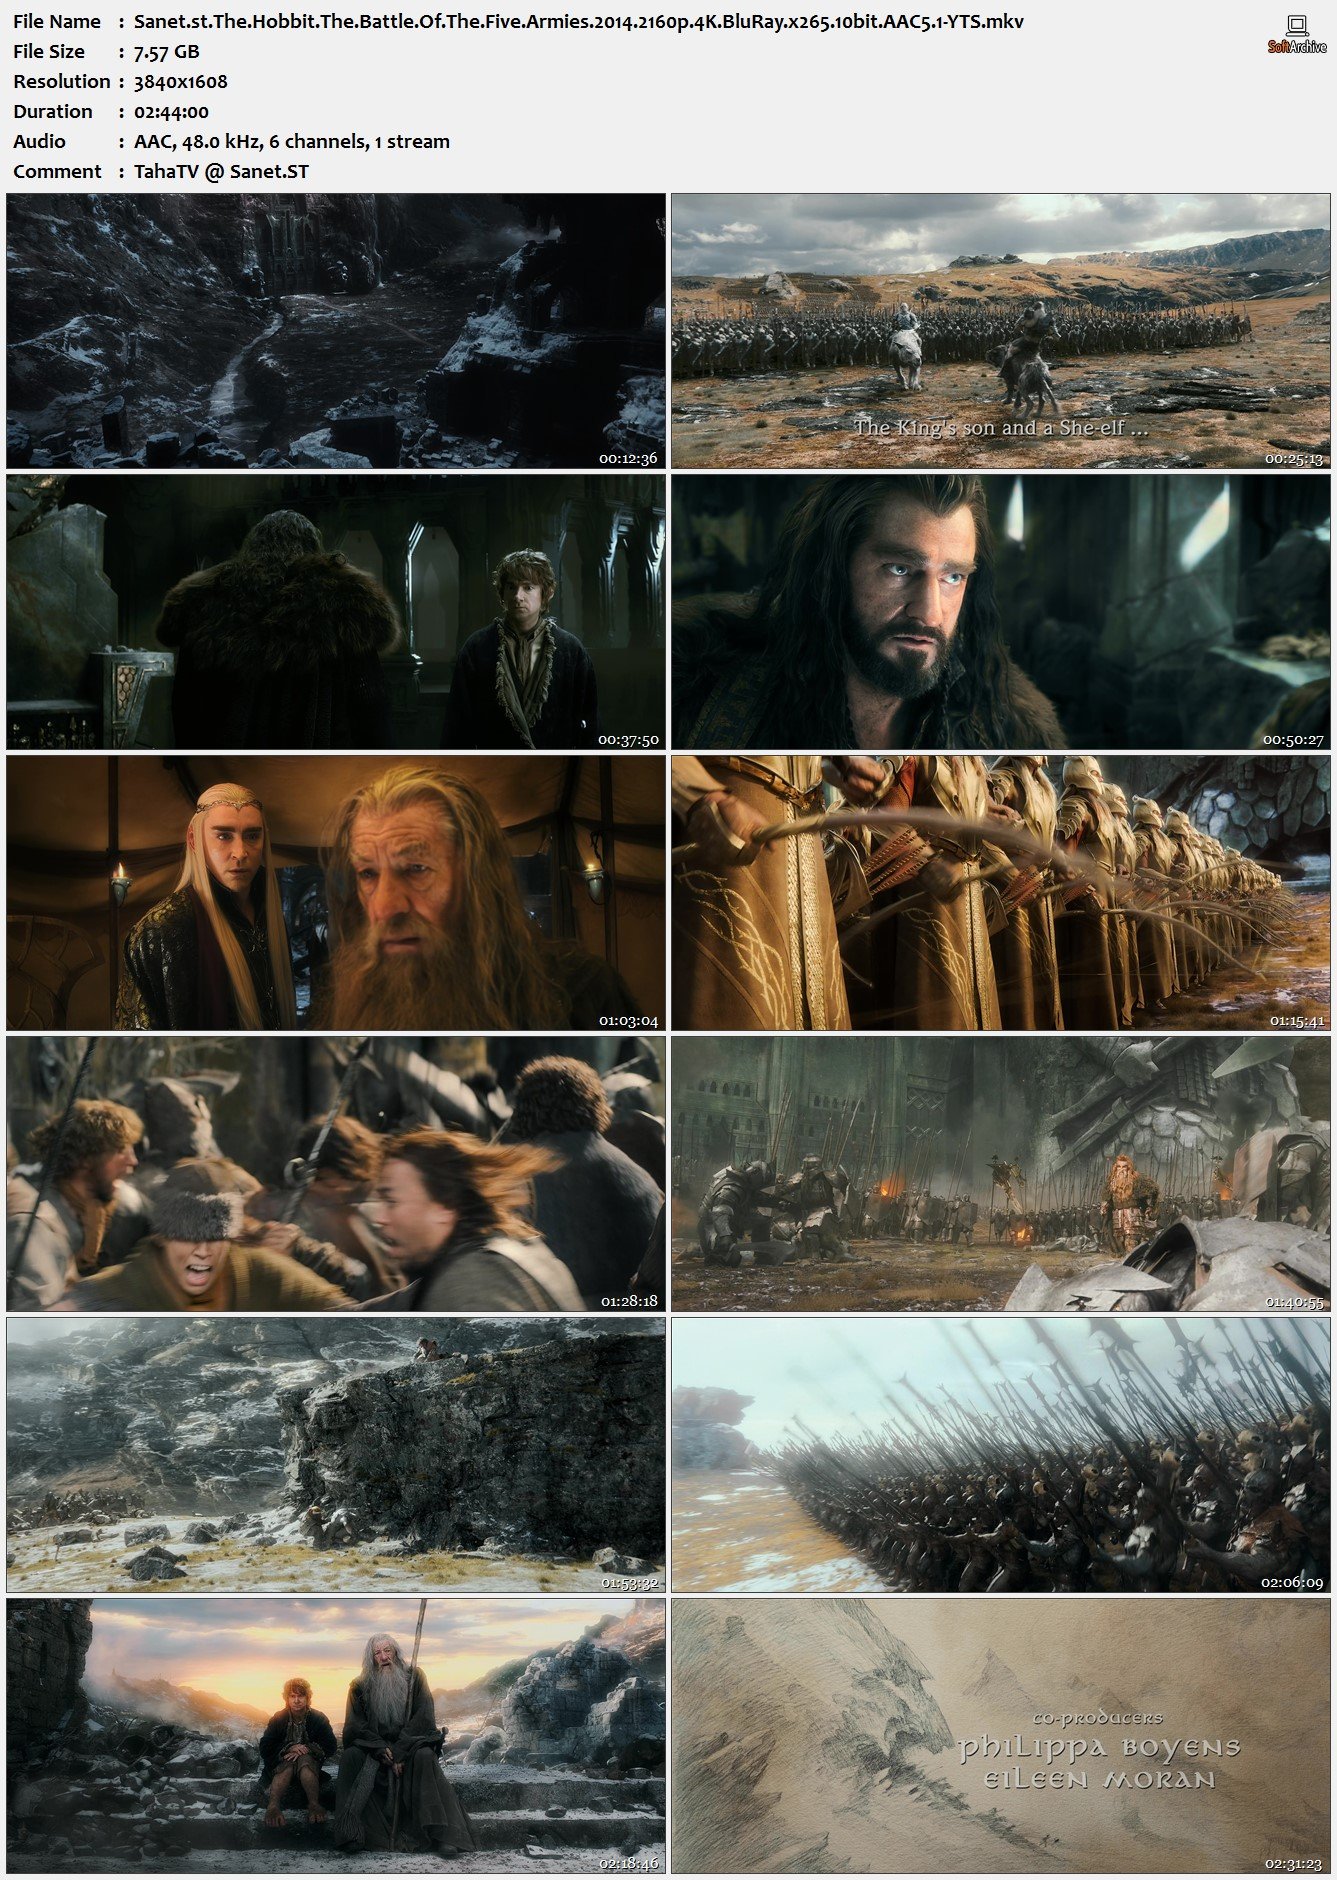 download the new version for iphoneThe Hobbit: The Battle of the Five Ar